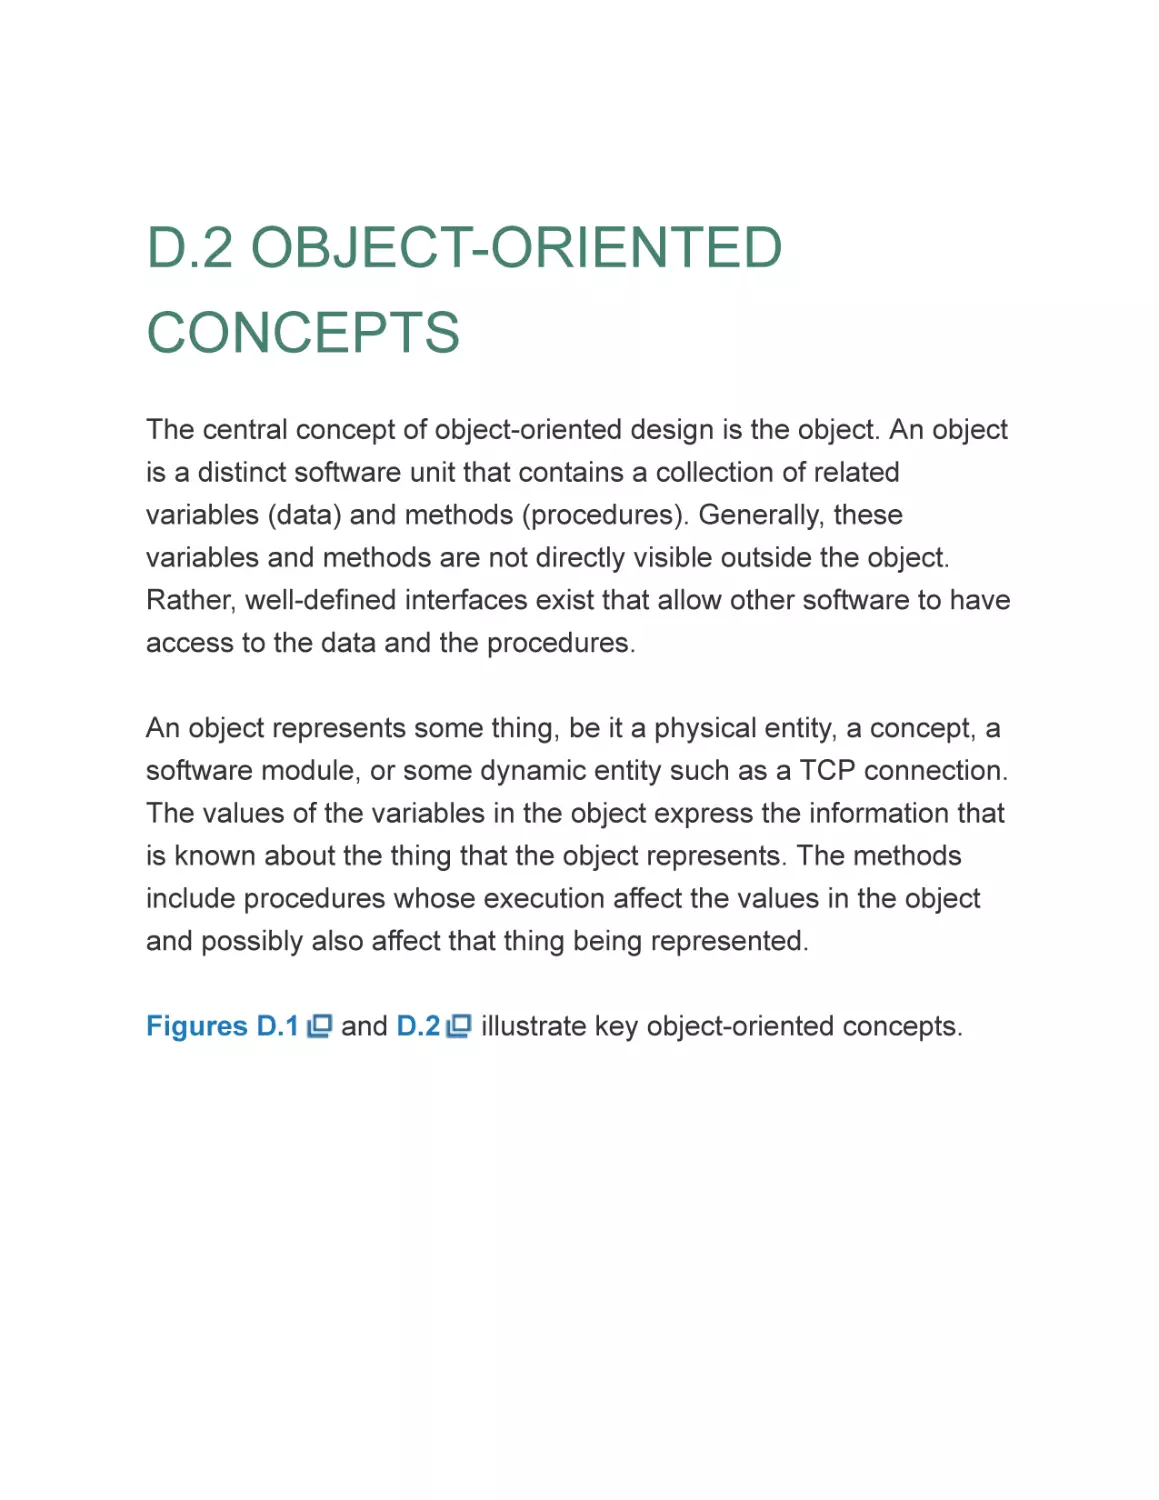 D.2 OBJECT-ORIENTED CONCEPTS